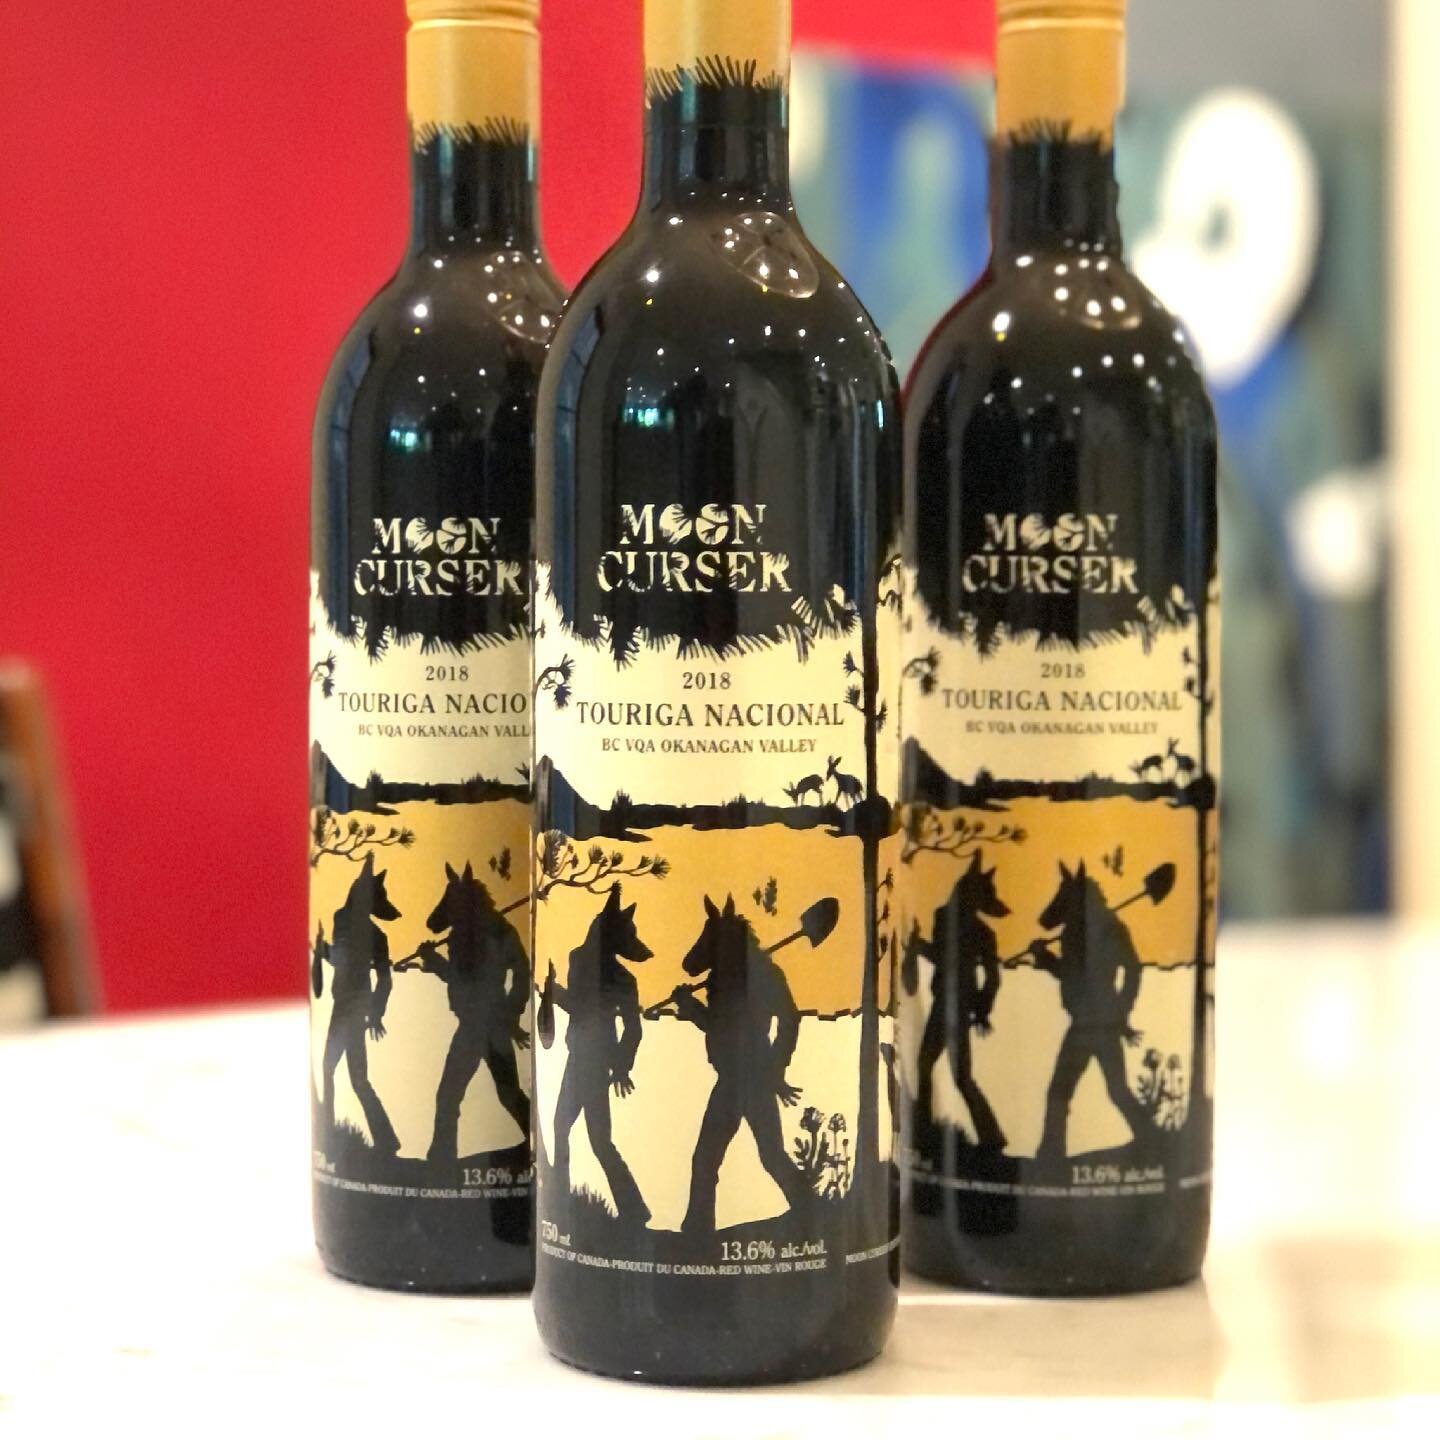 Excited to announce the 2018 Moon Curser Vineyards Touriga Nacional is available in the #lcbo Classics Catalogue June 2021 edition. Sold out at the winery and rated 91 points by @winealign this brooding beauty is an incredible example of the results 